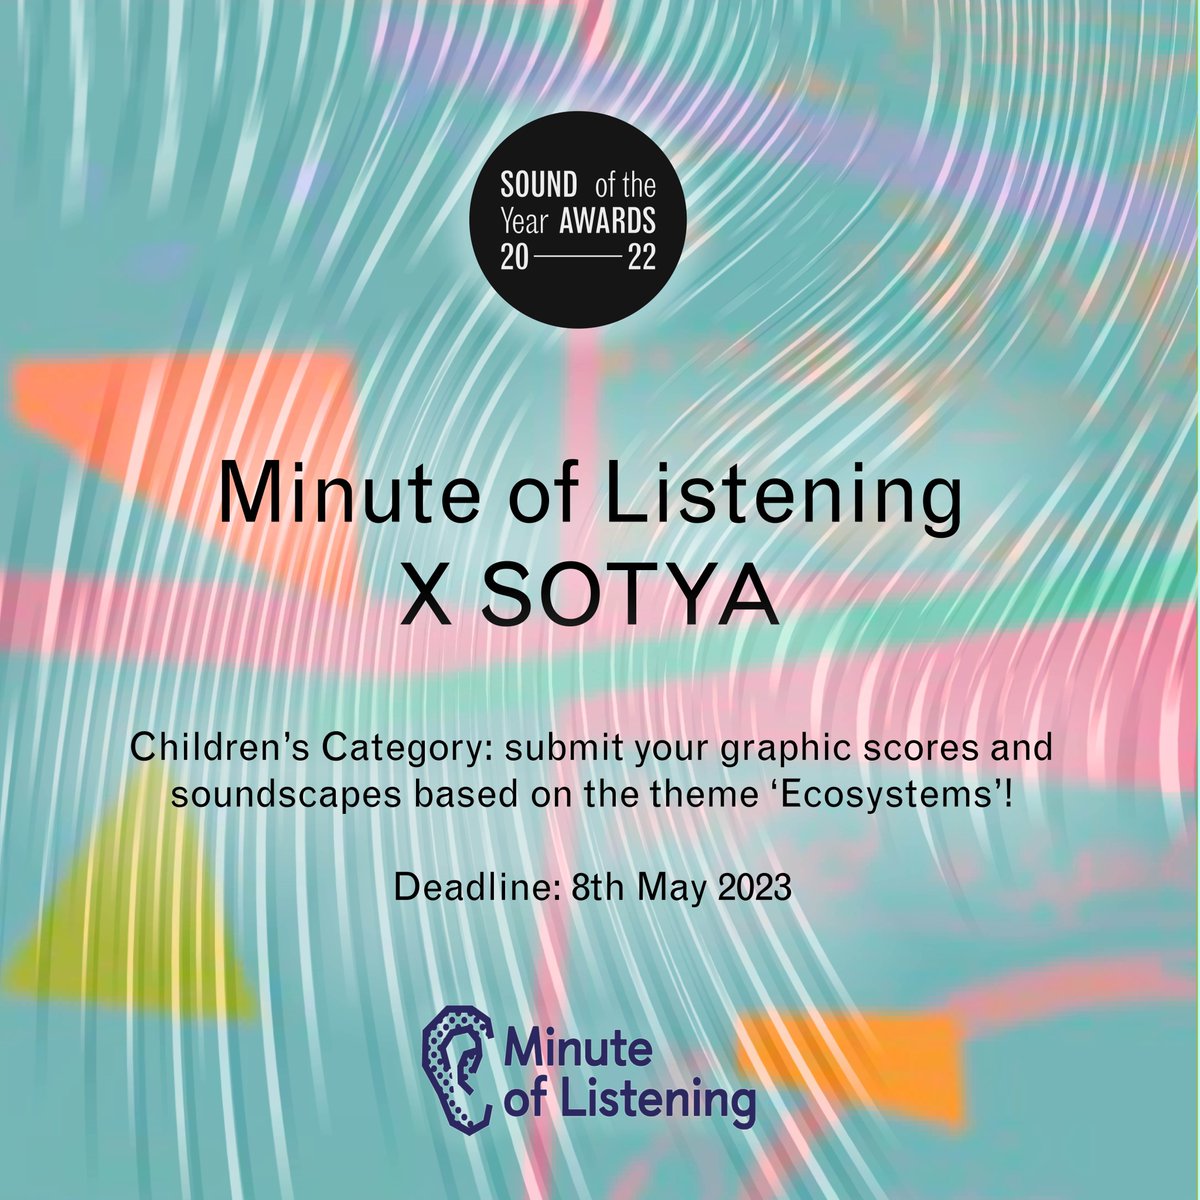 For this year’s partnership between SOTYA and @SoundandMusic's #MinuteofListening, we are inviting children and classes of children to create a graphic score and submit their own 60-second soundscape exploring the theme of ecosystems.